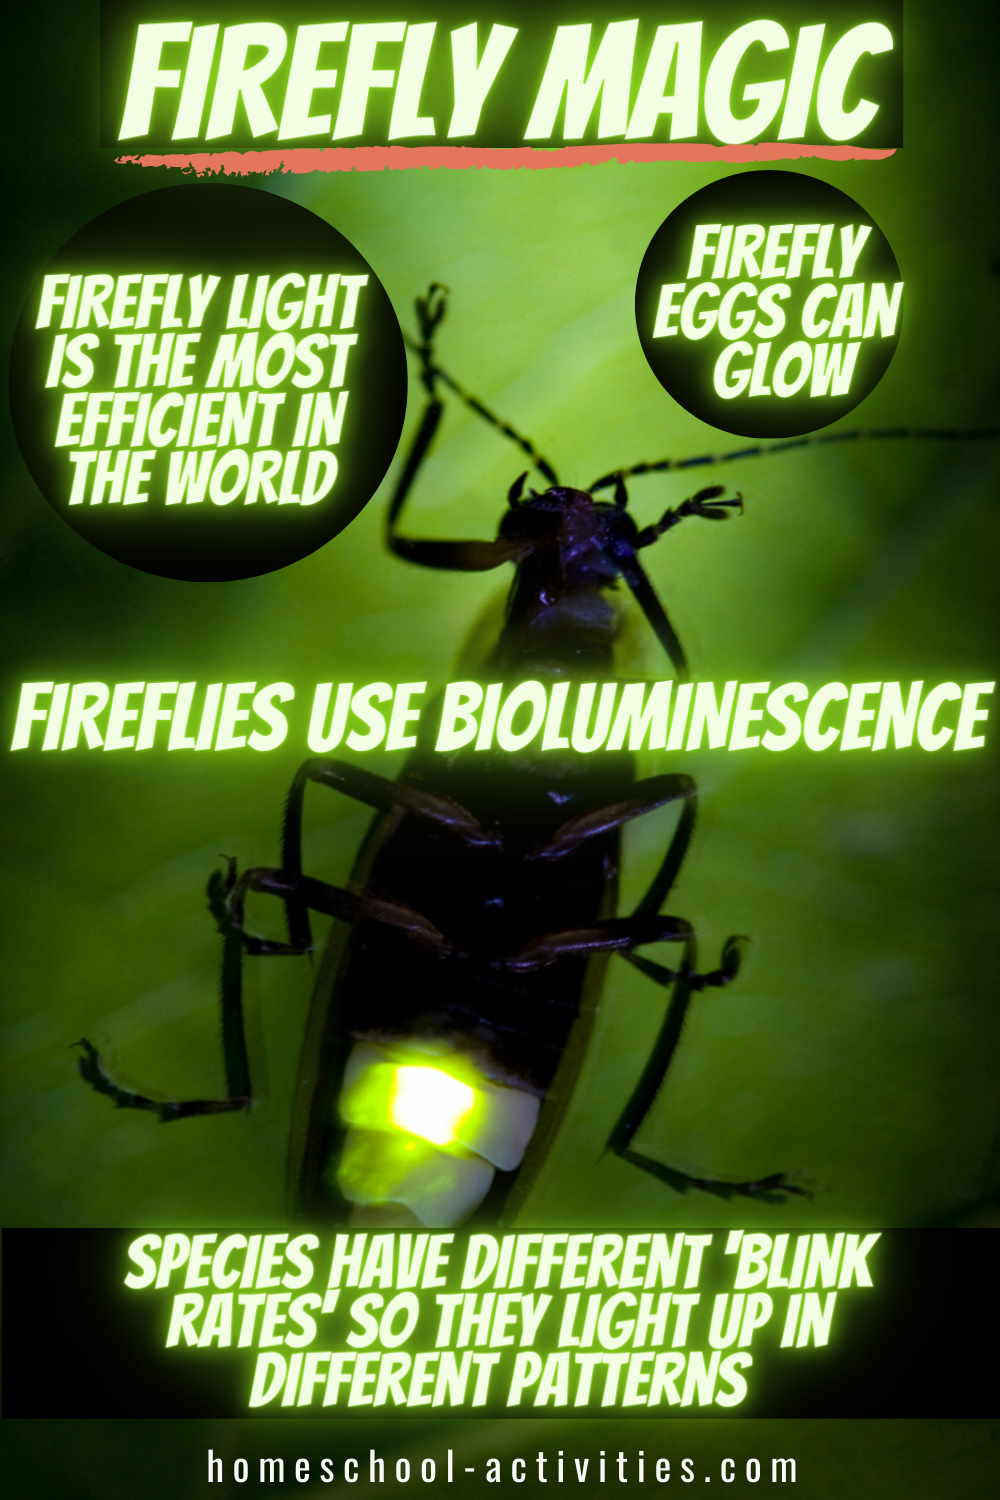 Firefly facts. They use bioluminescence and are the most efficient producer of light in the world.